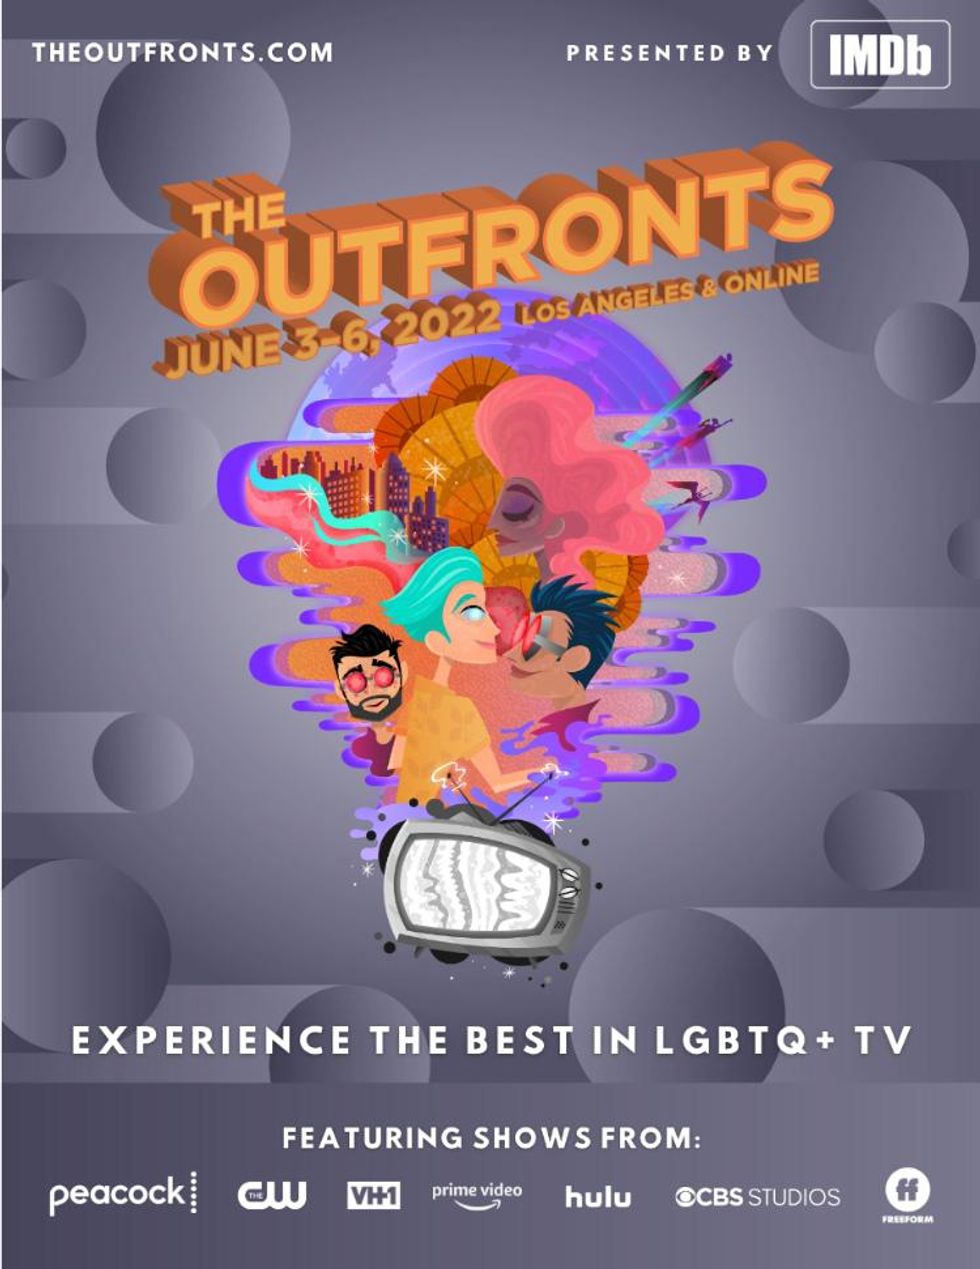 Here’s How to Tune In to 'The Outfronts’ LGBTQ+ Television Festival